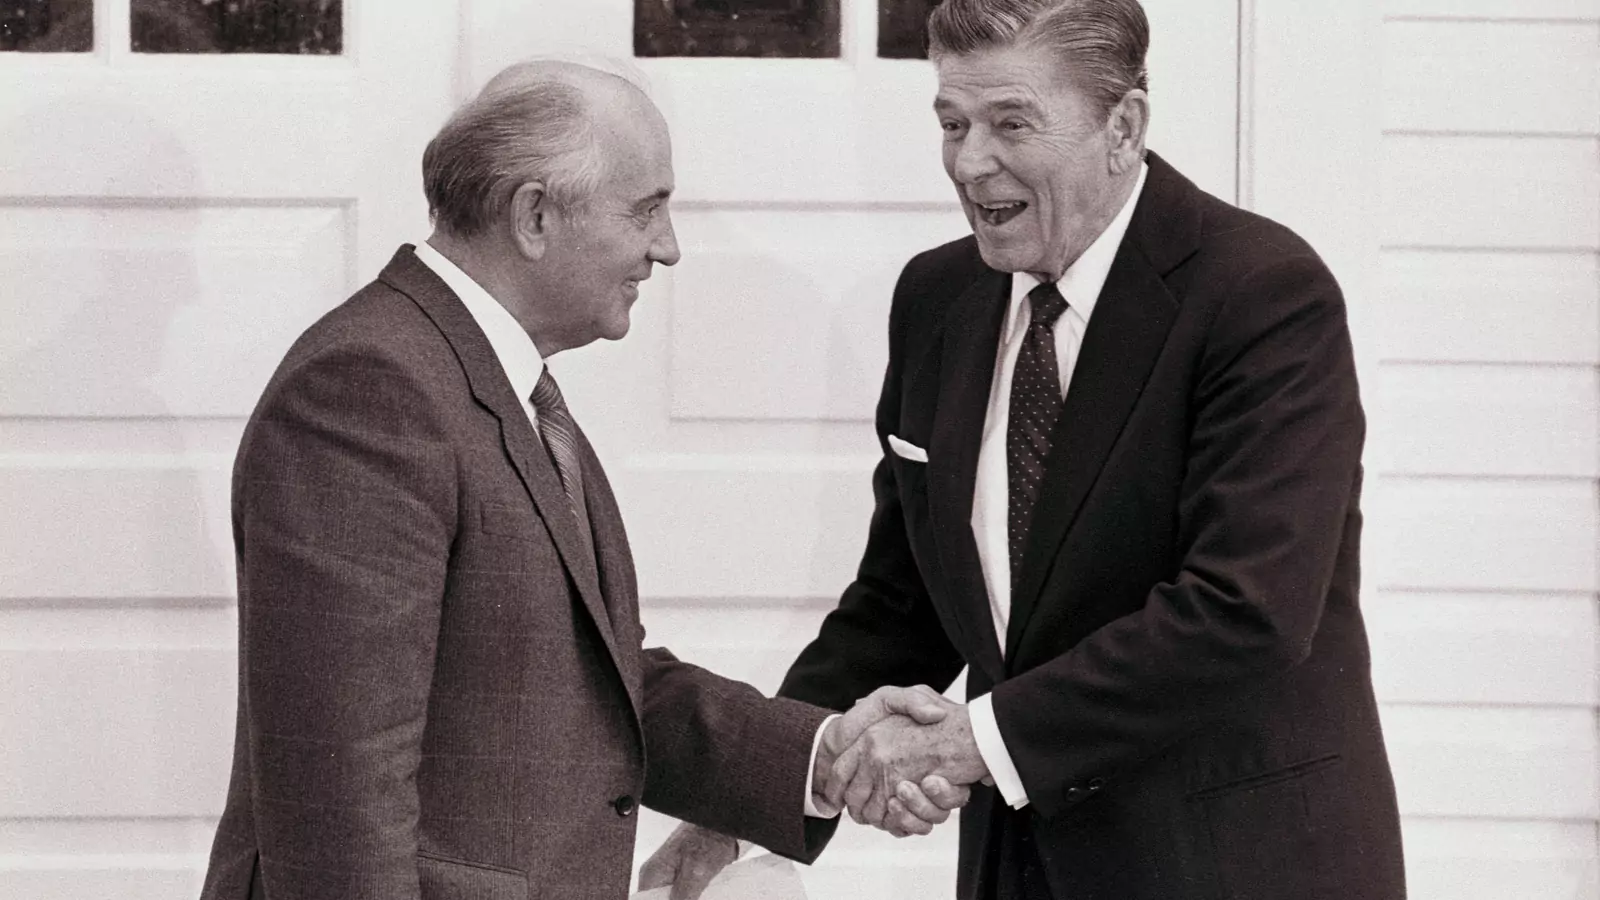 Reagan and Gorbachev shake hands after their talks in Reykjavik.